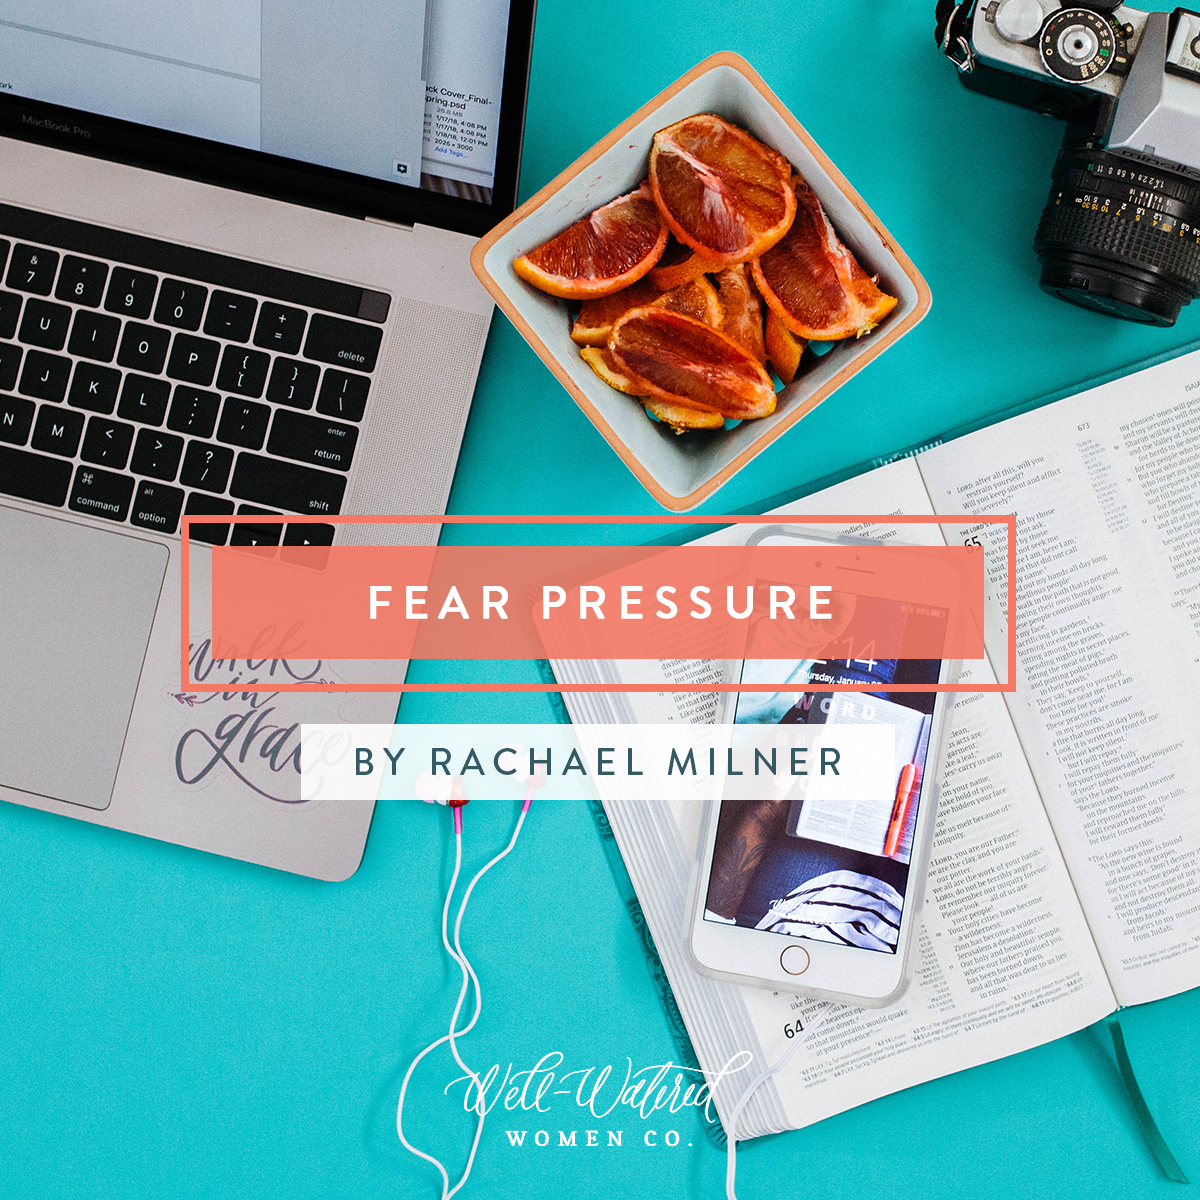 Sometimes pressure comes from outside factors, but often it comes from the fear in our hearts we don't know how to handle.